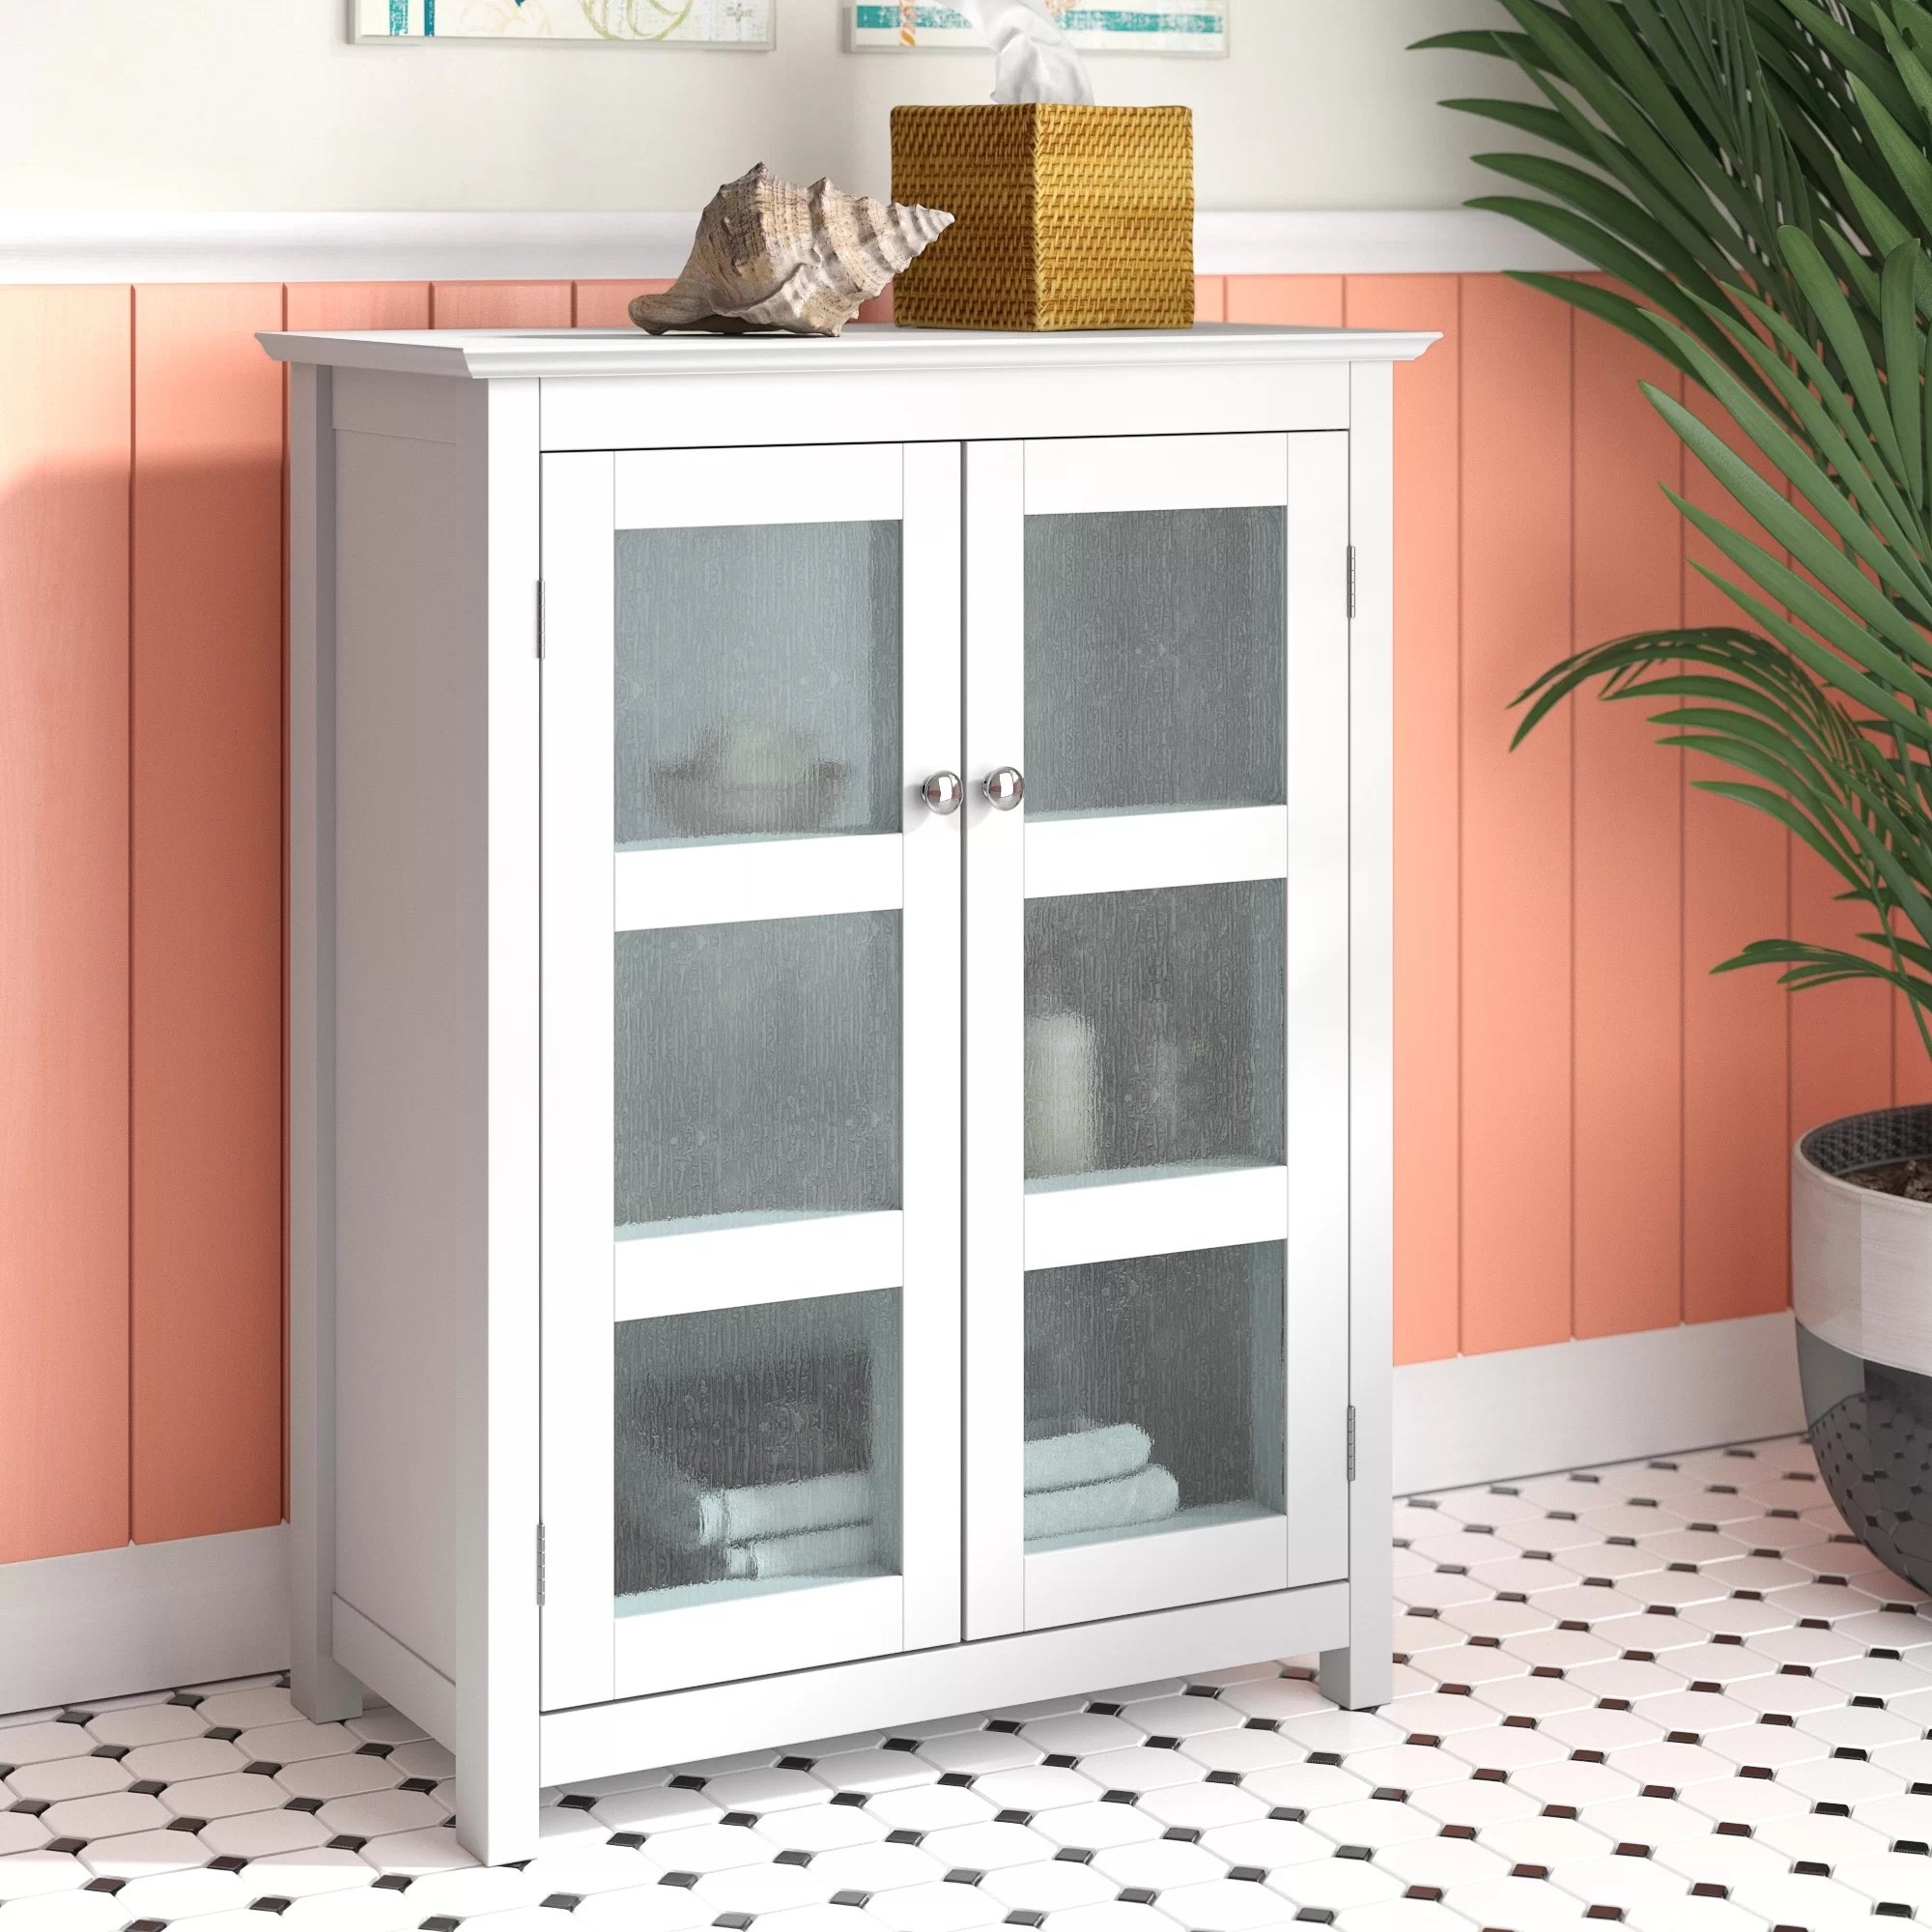 A free-standing bathroom cabinet with a seashell and tissues on top